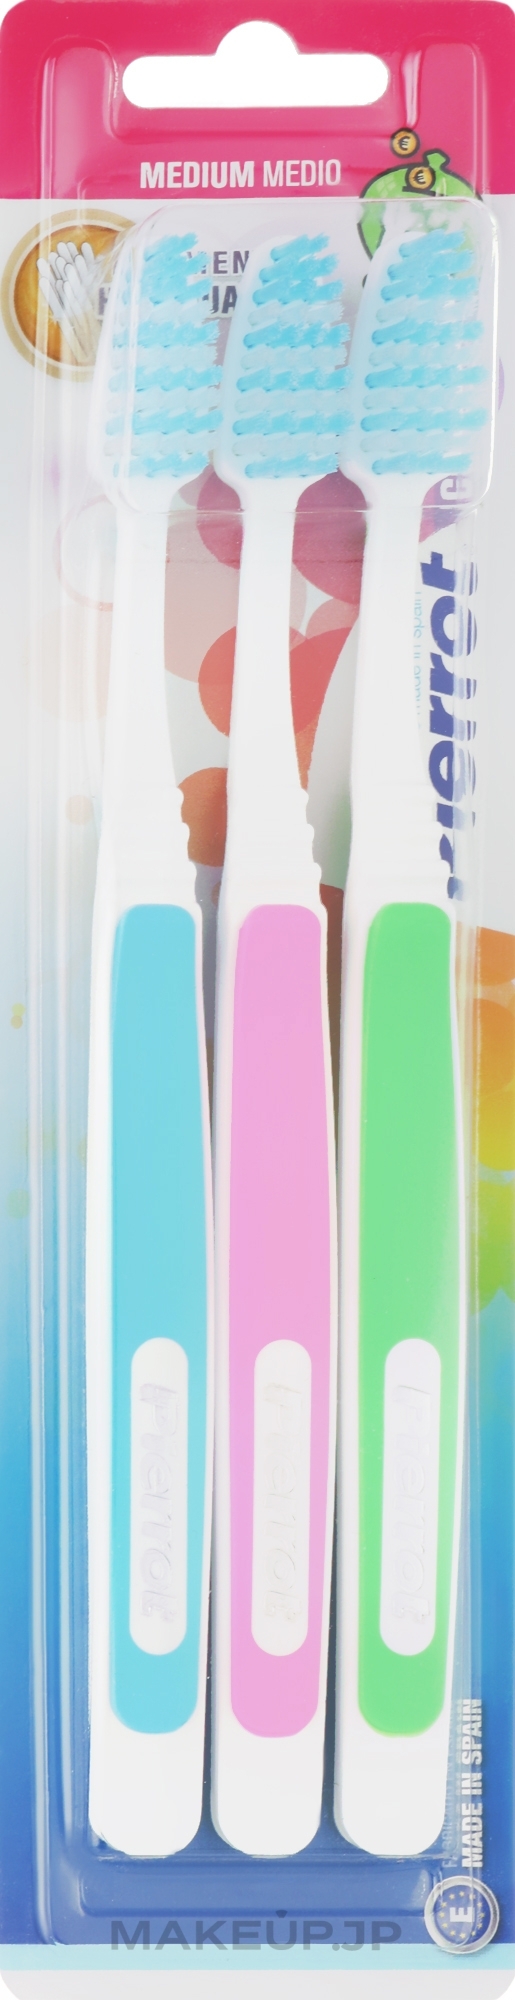 Toothbrush Set "Coloros", green + pink + blue - Pierrot New Active — photo 3 szt.